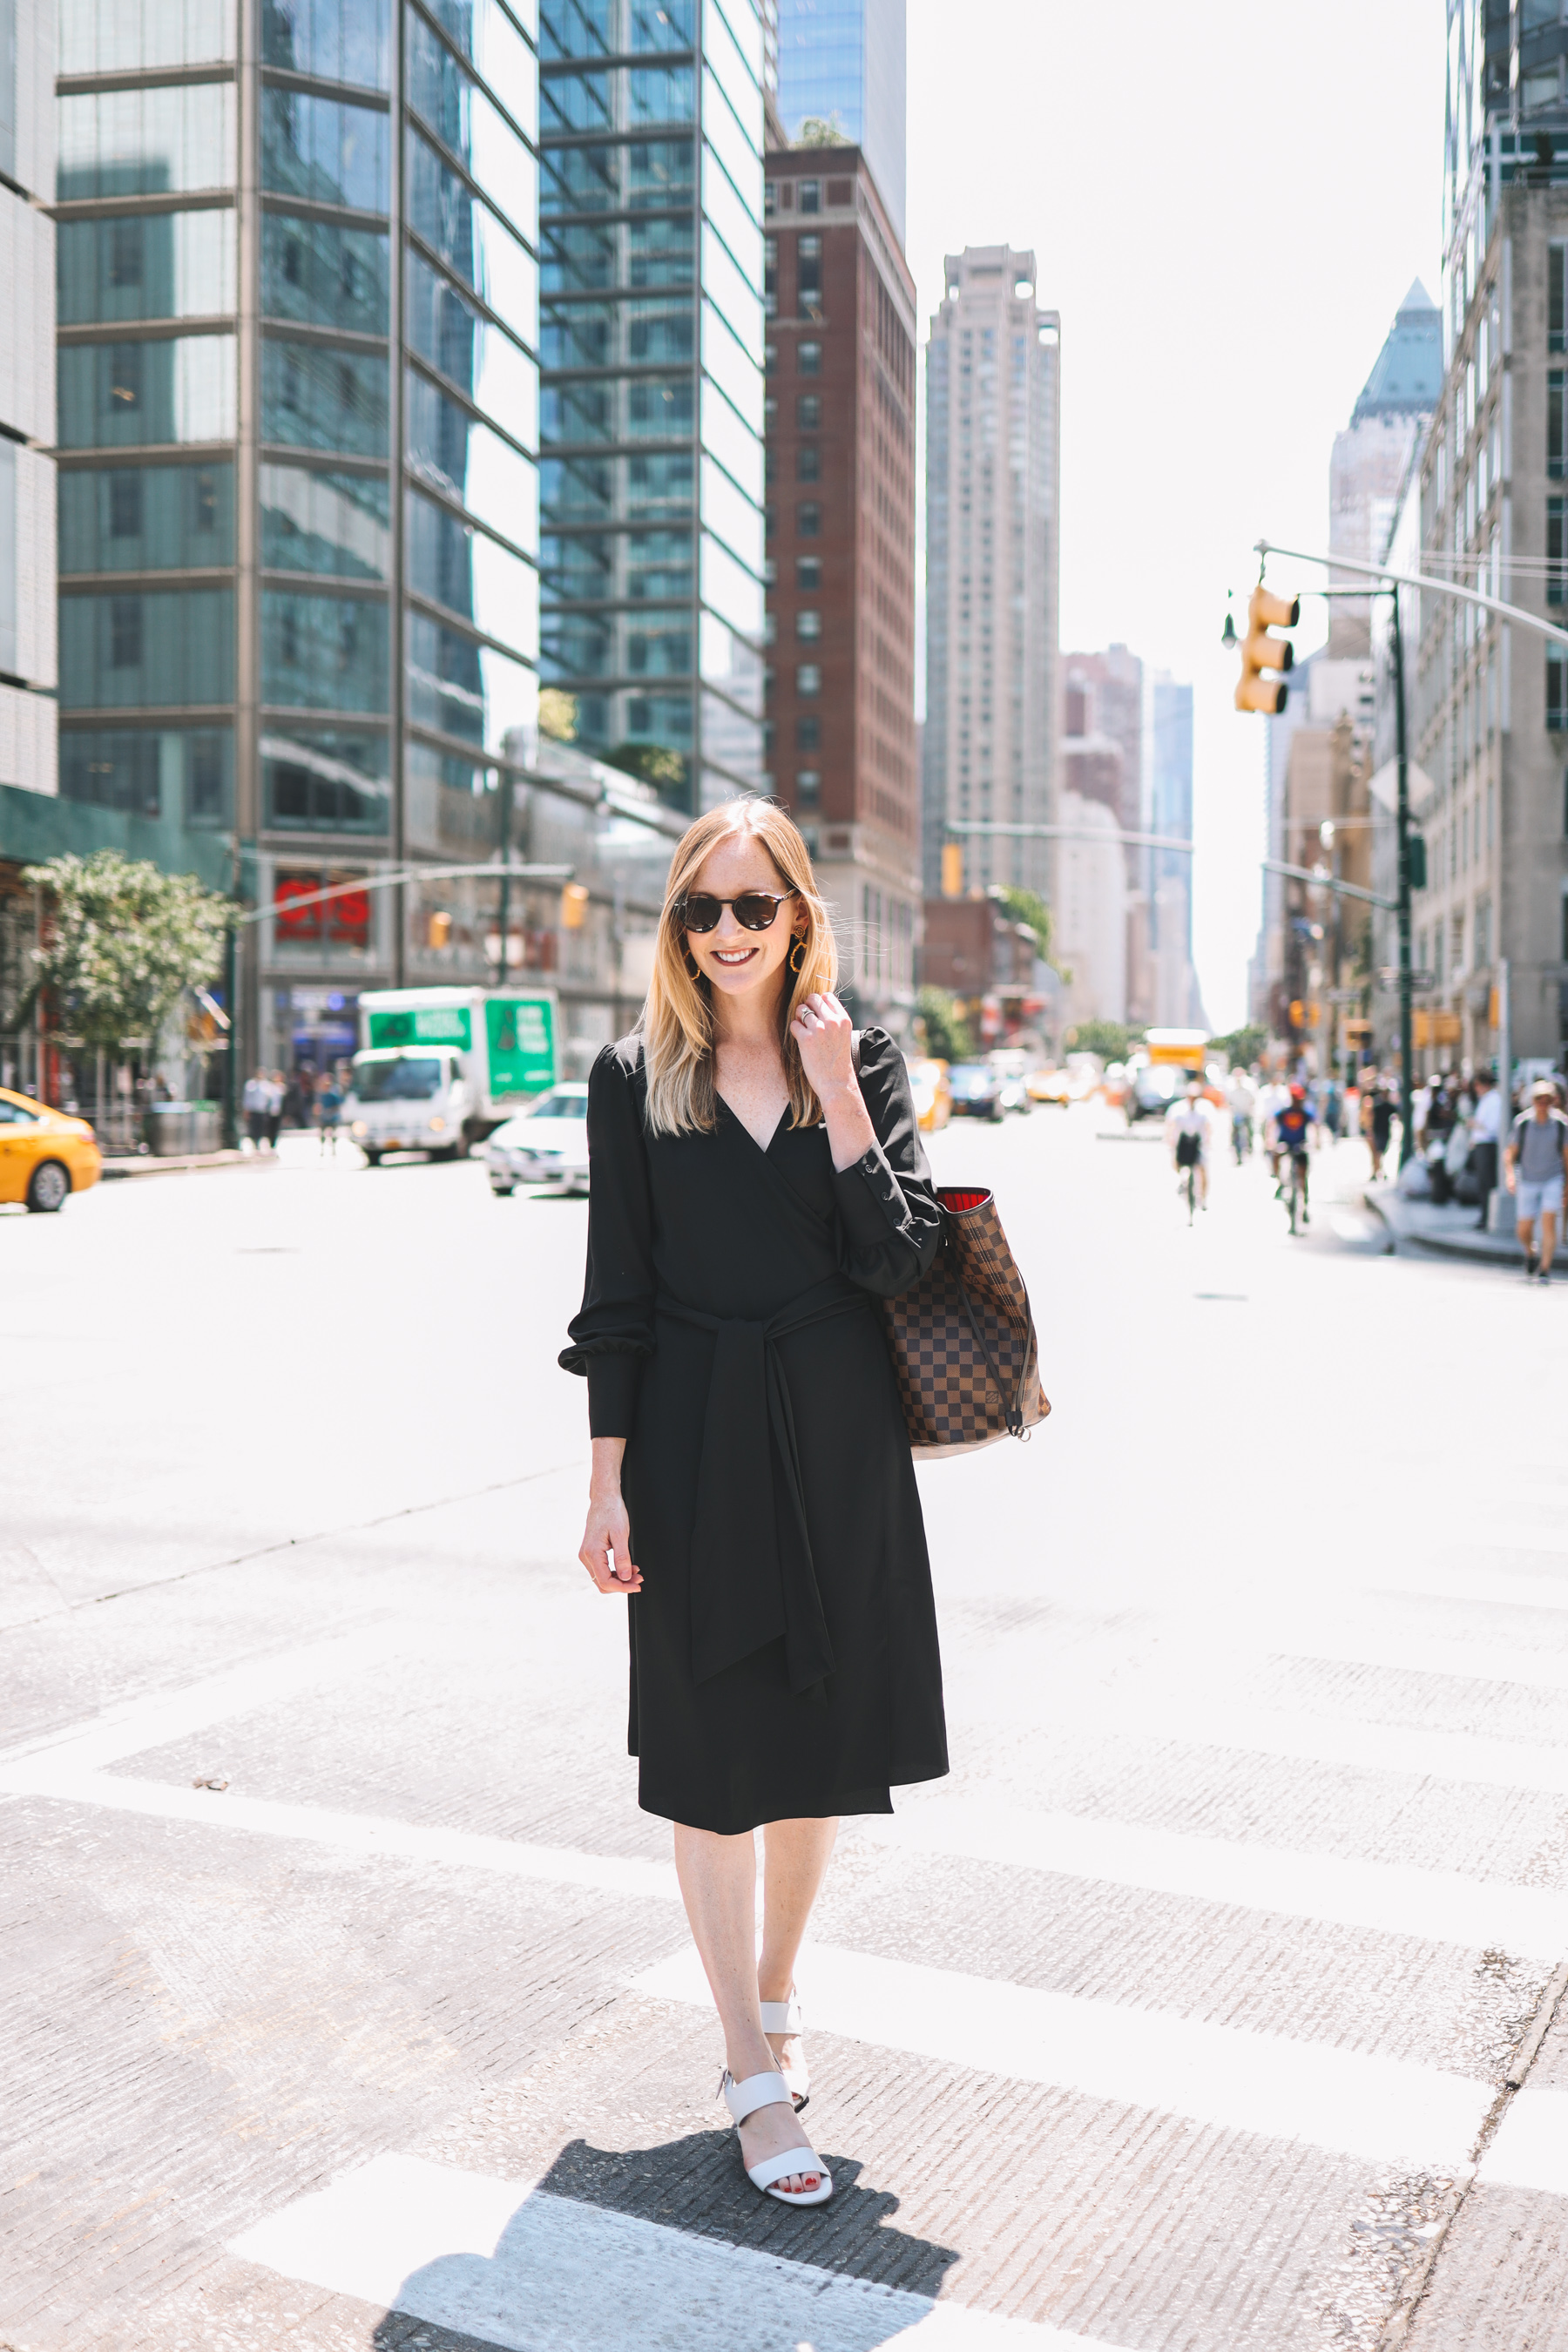 Kelly smiling in a black wrap dress with a New York City street in the background